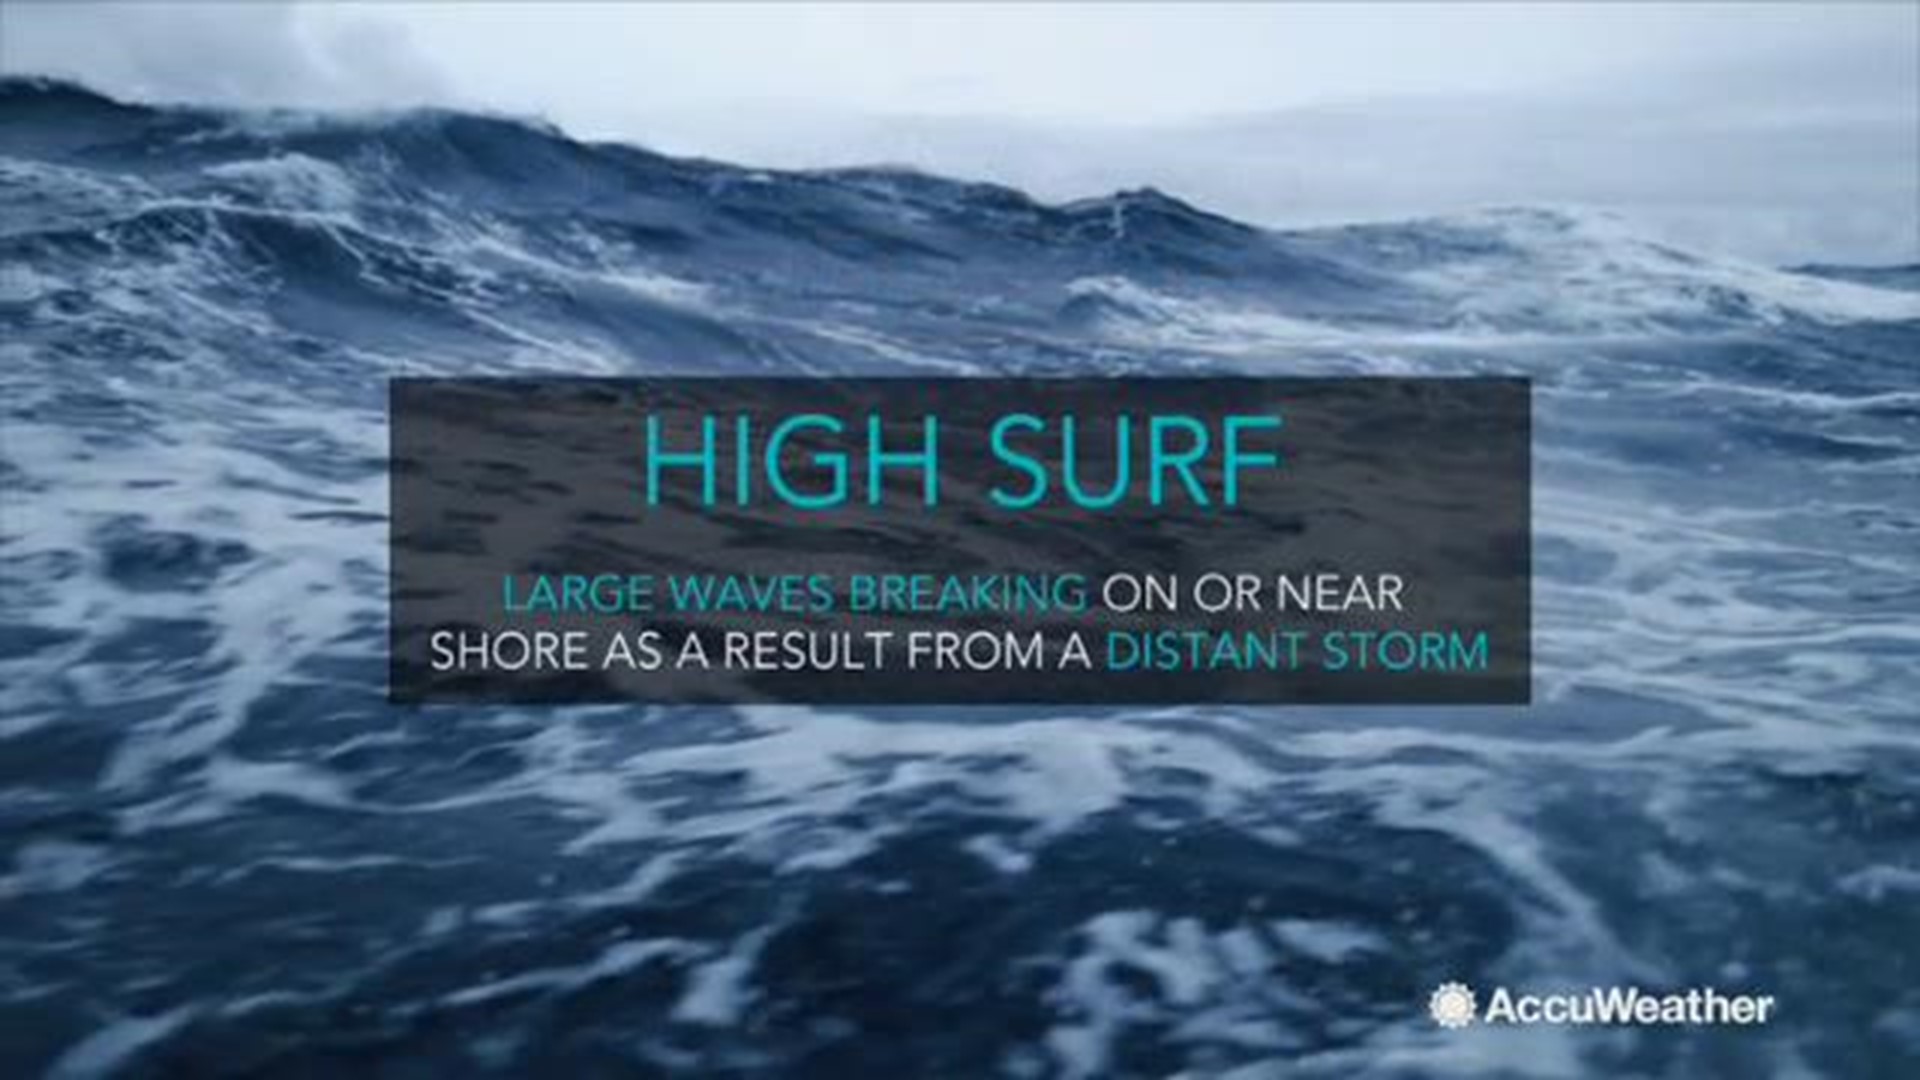 High surf is when large waves break on or near the shore, as a result from a distant storm. Thats when either a high surf advisory or warning is issued.